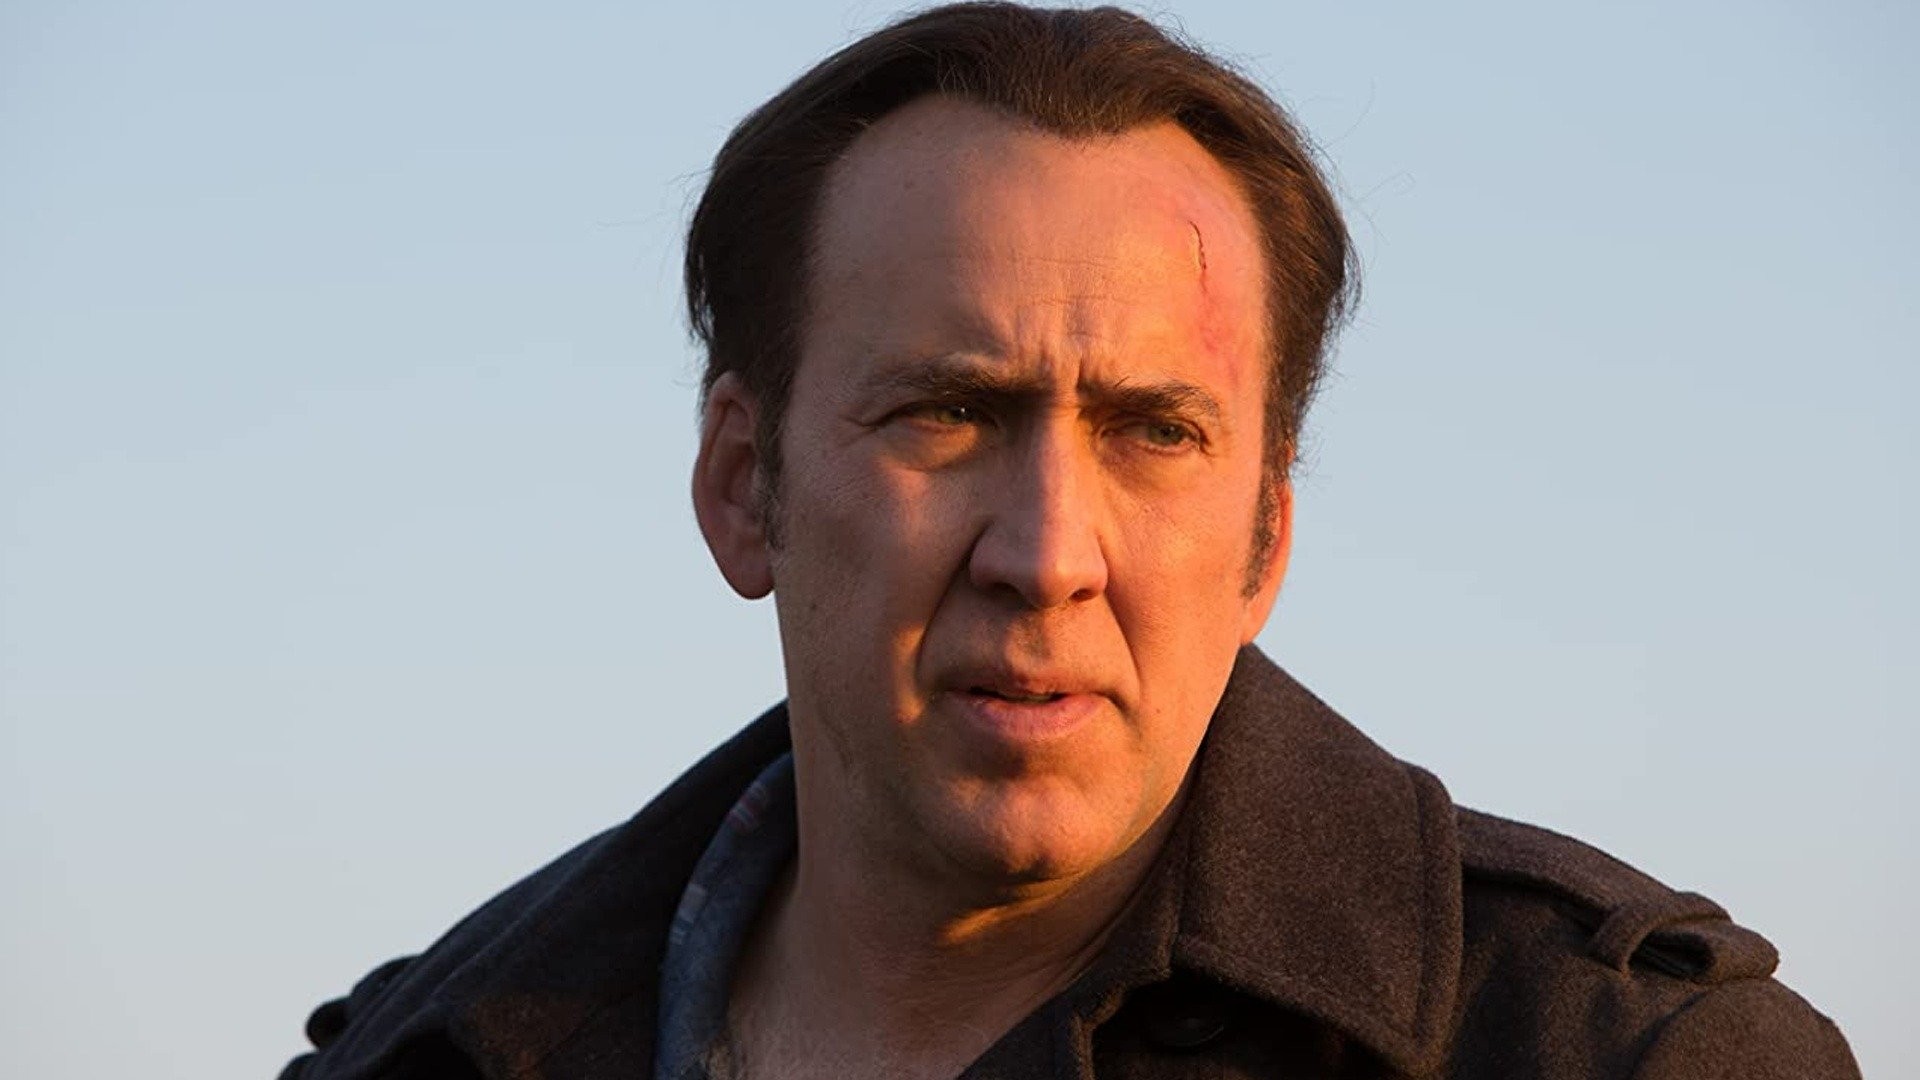 Pay the Ghost - Rotten Tomatoes